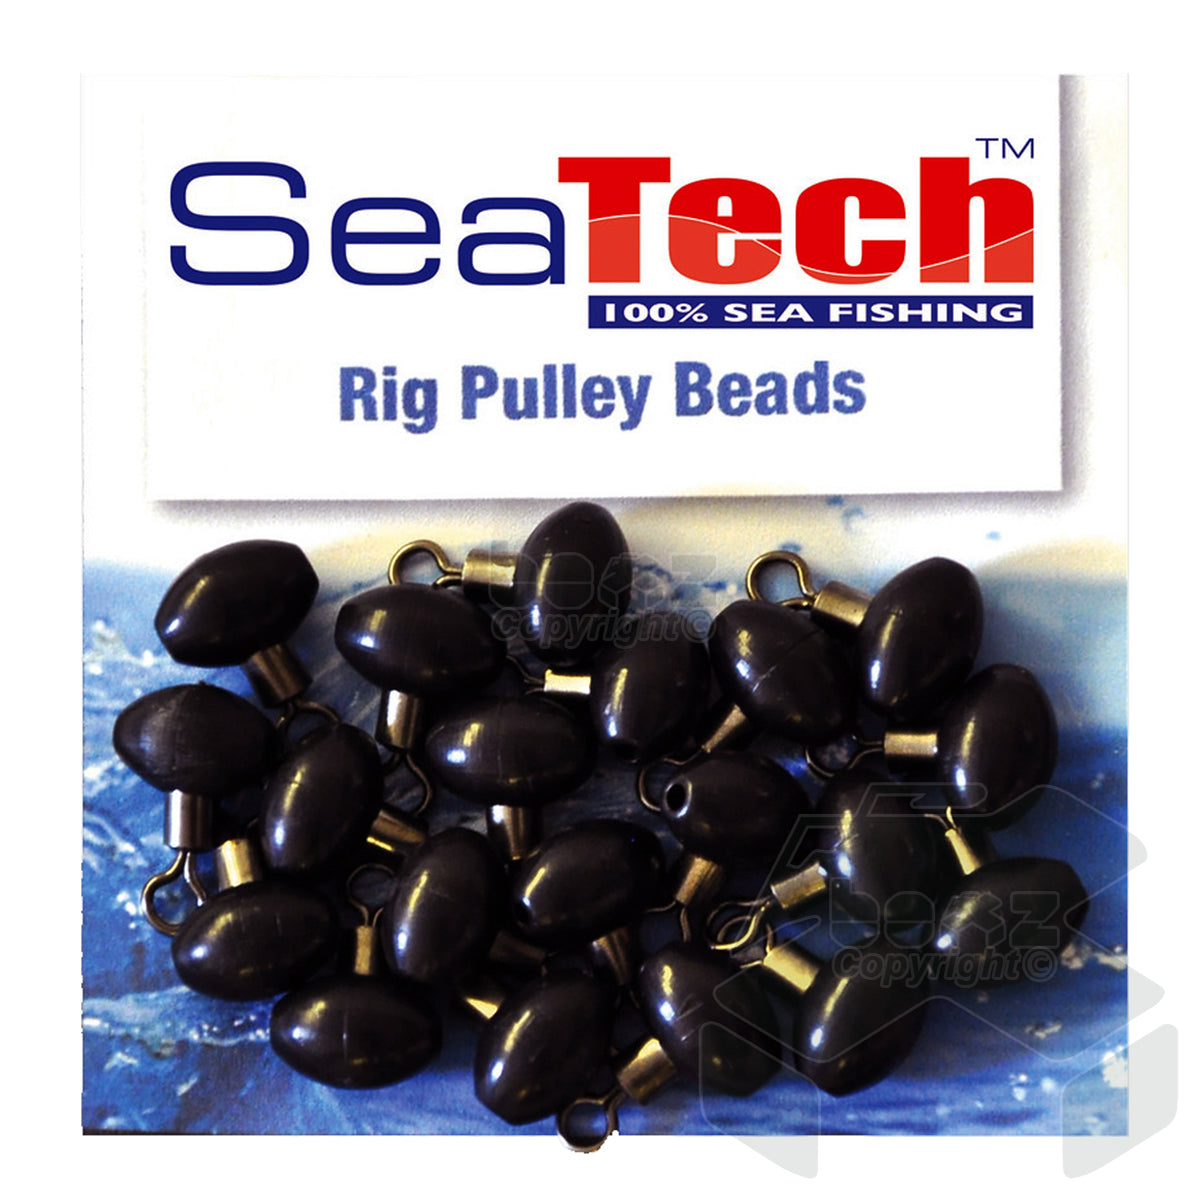 Seatech Rig Pulley Beads 10 Pack